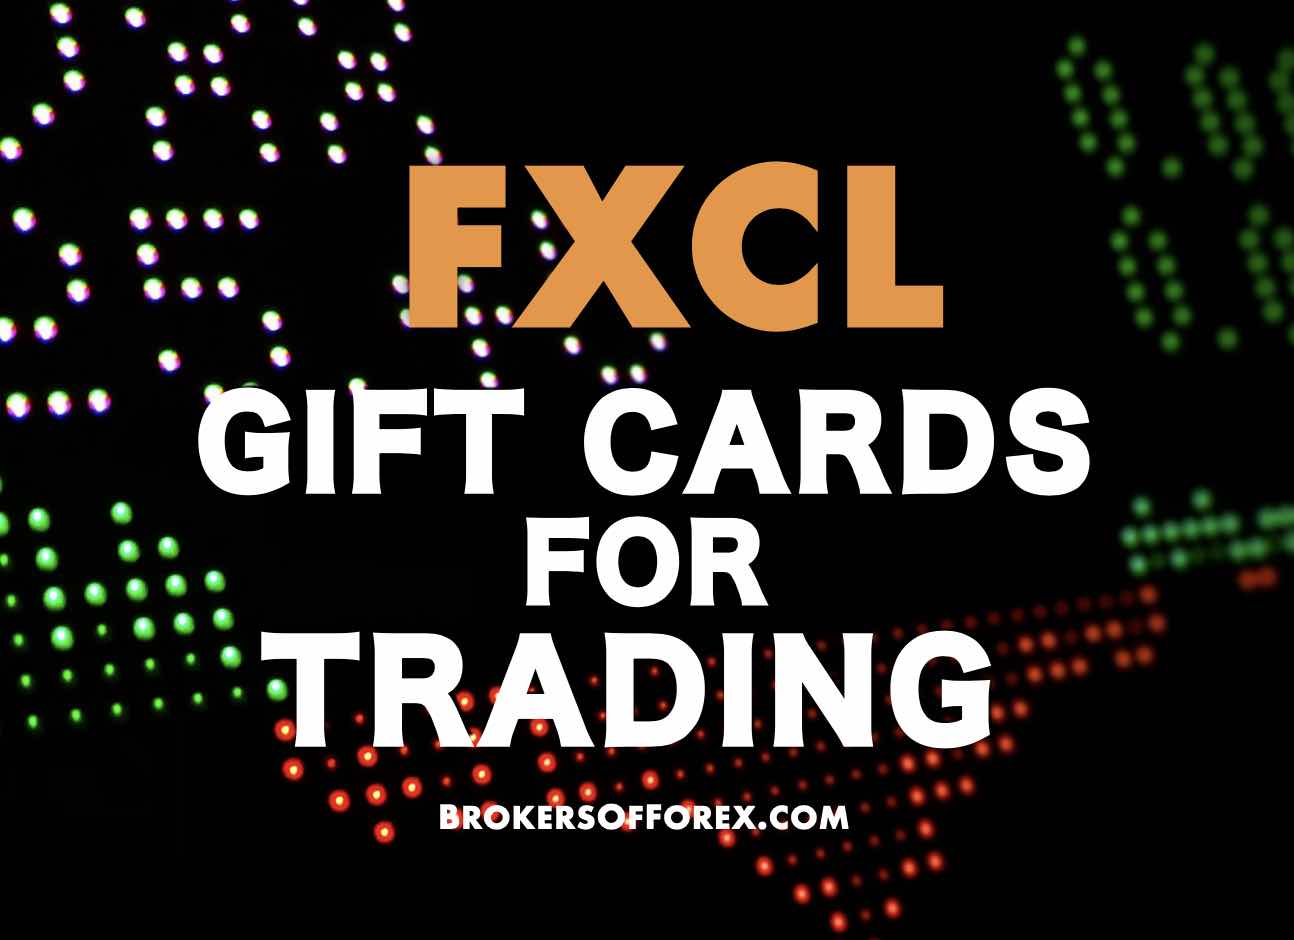 FXCL Gift Cards for Trading